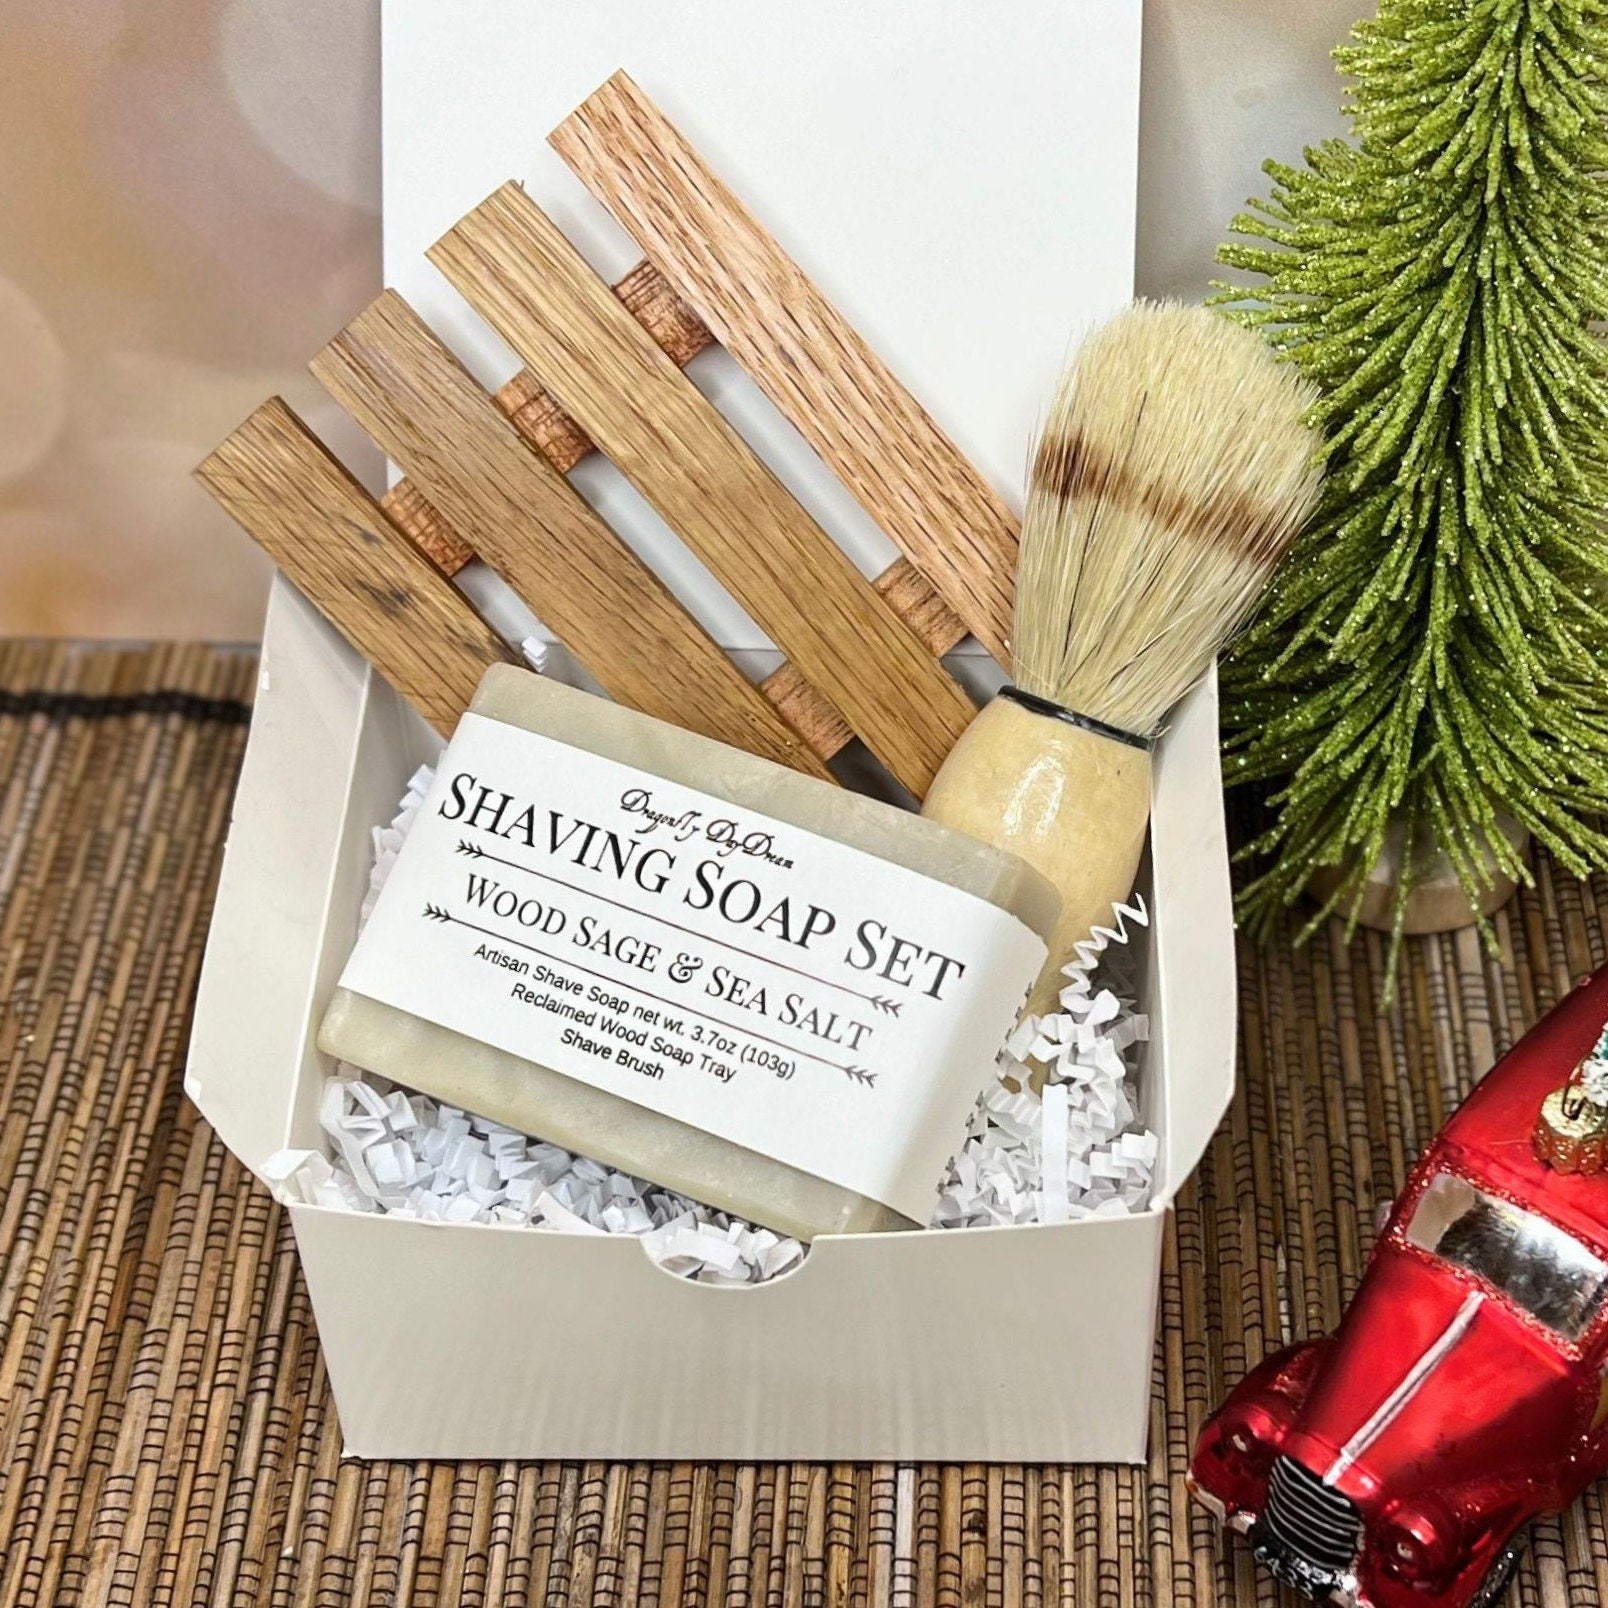 White gift box with wood sage and sea salt soap, reclaimed wood tray, and shaving brush on grass mat, with sparkly tree, red truck ornament, and blurred fairy lights in background.